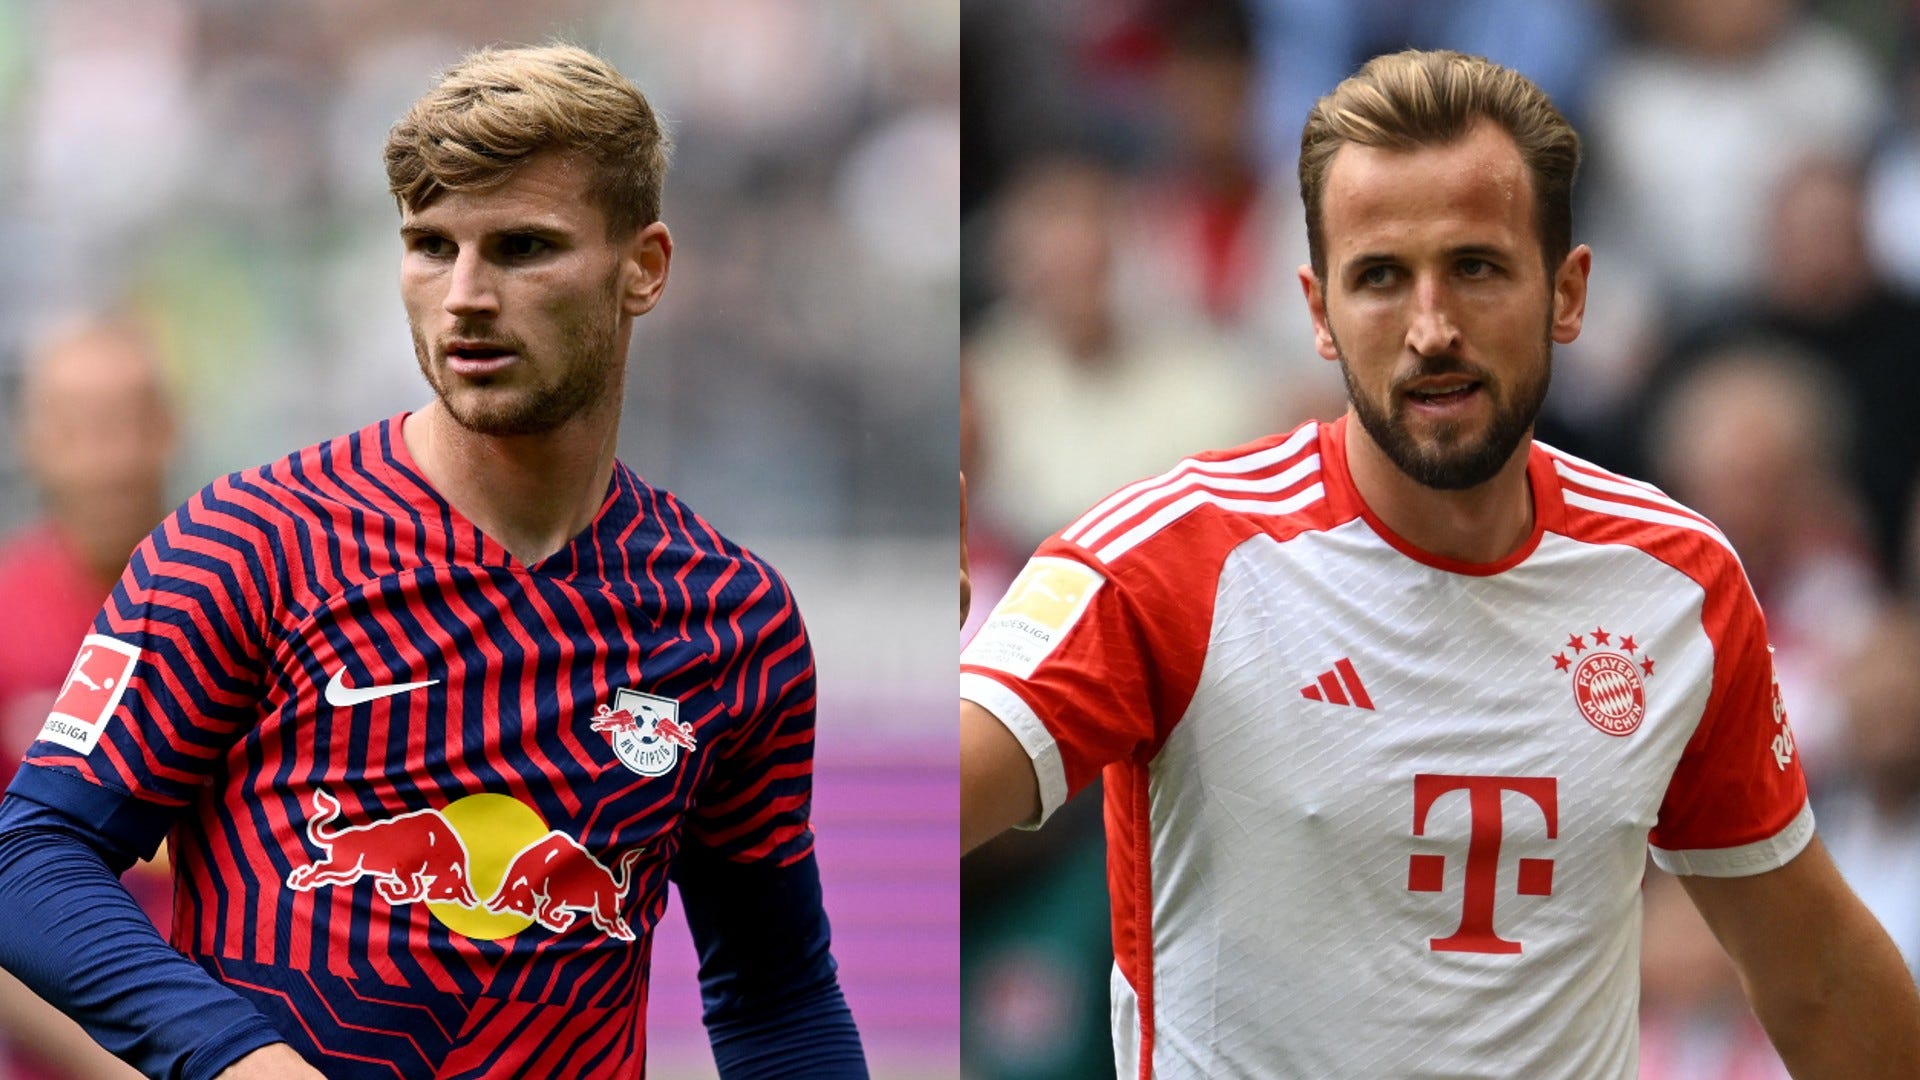 RB Leipzig vs Bayern Munich Live stream, TV channel, kick-off time and where to watch Goal US